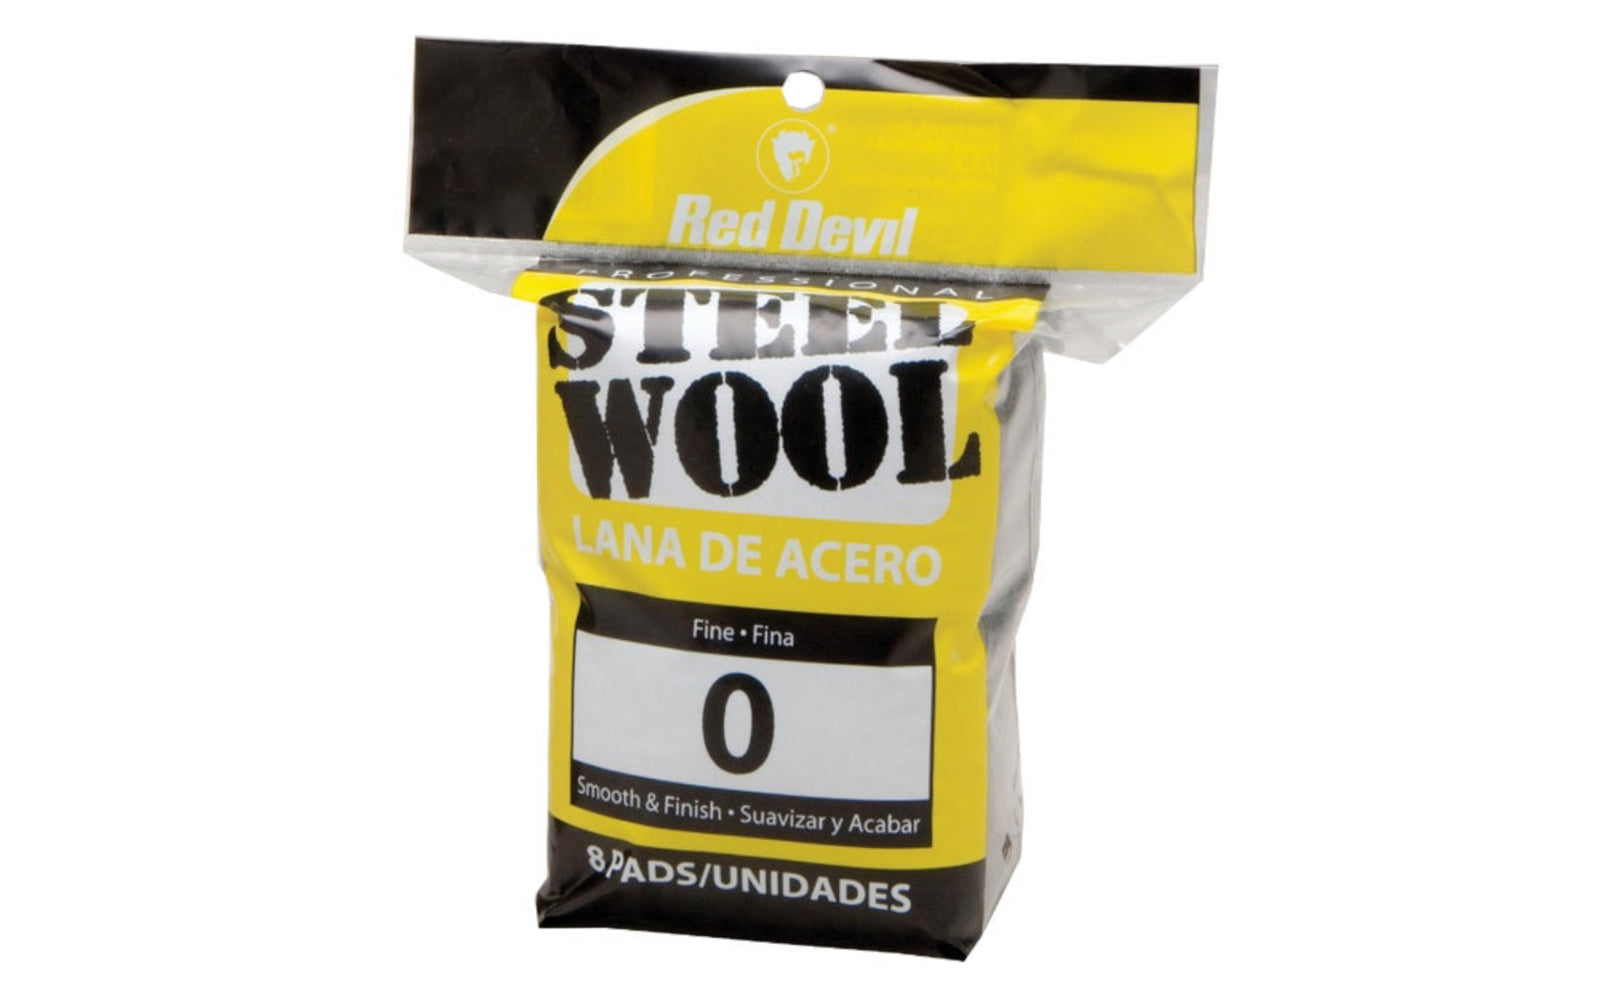 Red Devil #0 Fine Steel Wool - 8 Pack. General purpose use steel wool. Good for smoothing lacquer & varnishes, removing finishes from antiques & fine woodwork, & also good for scouring pots, pans & utensils & other household items, etc. Made by Red Devil, Inc.